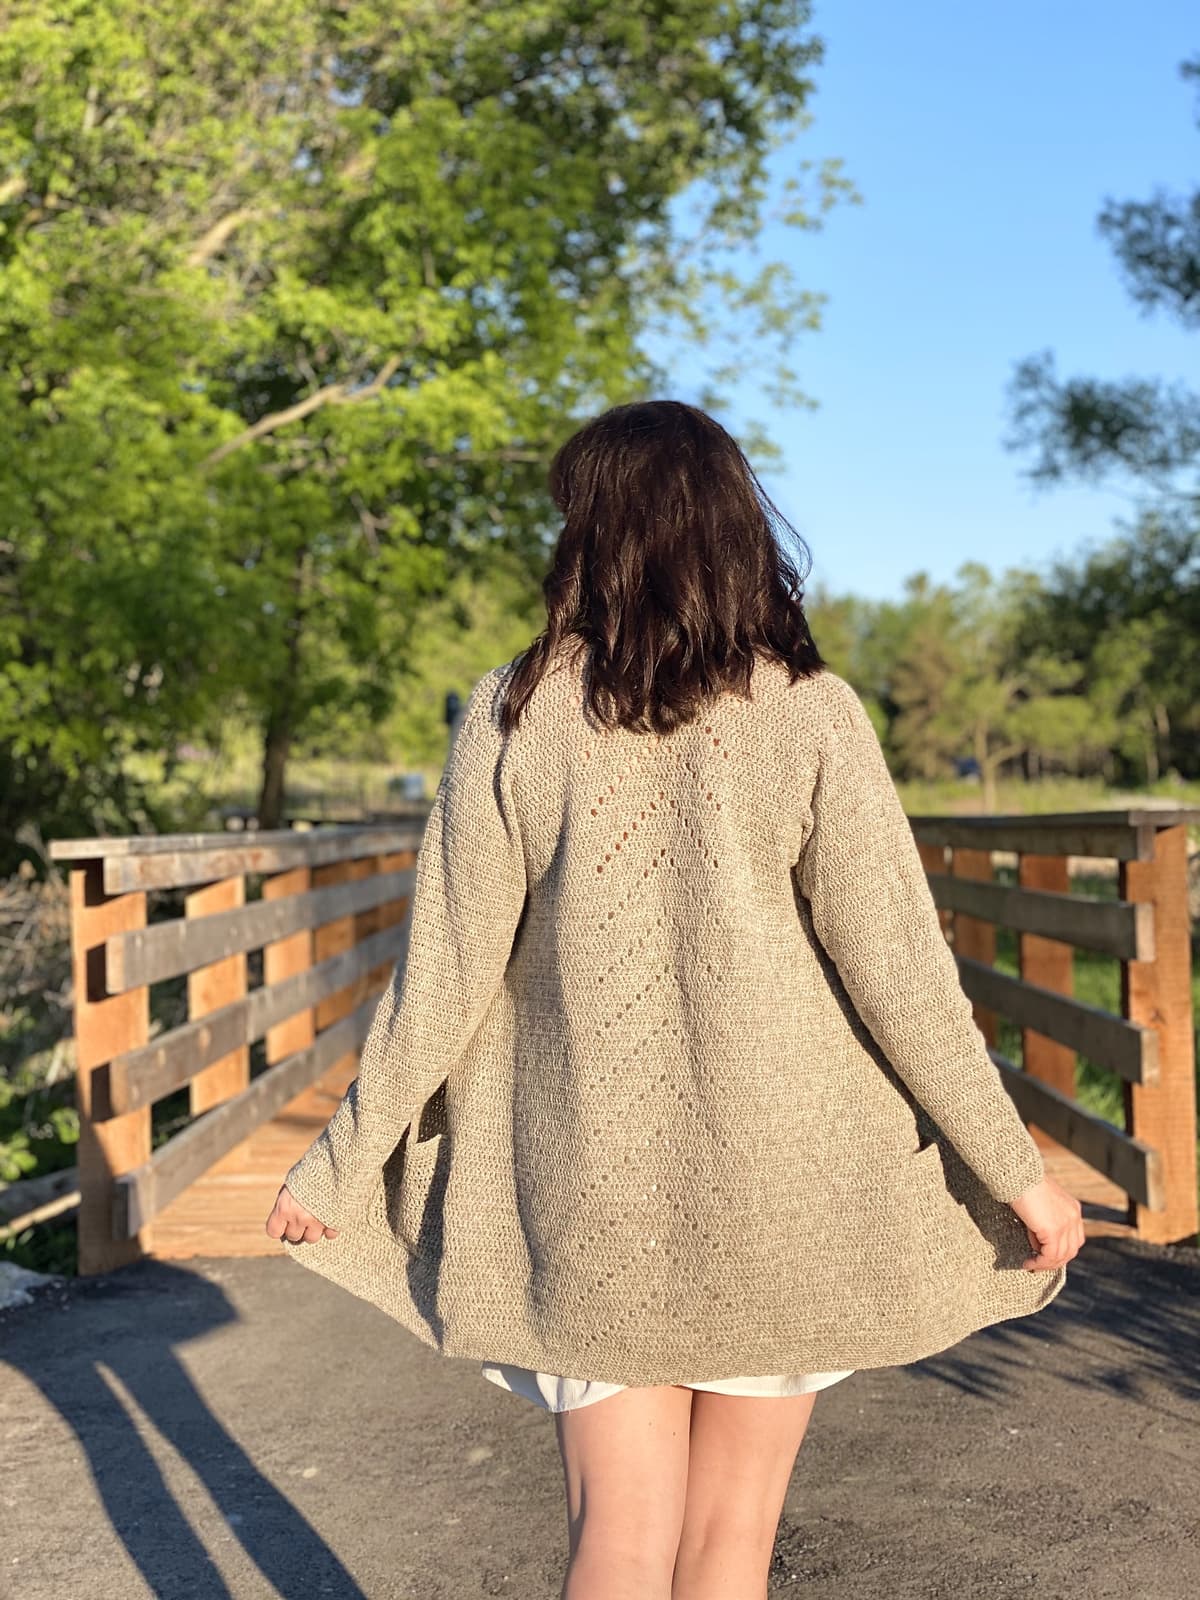 Image description: Woman seen from behind, holding the edges of a cardigan open.